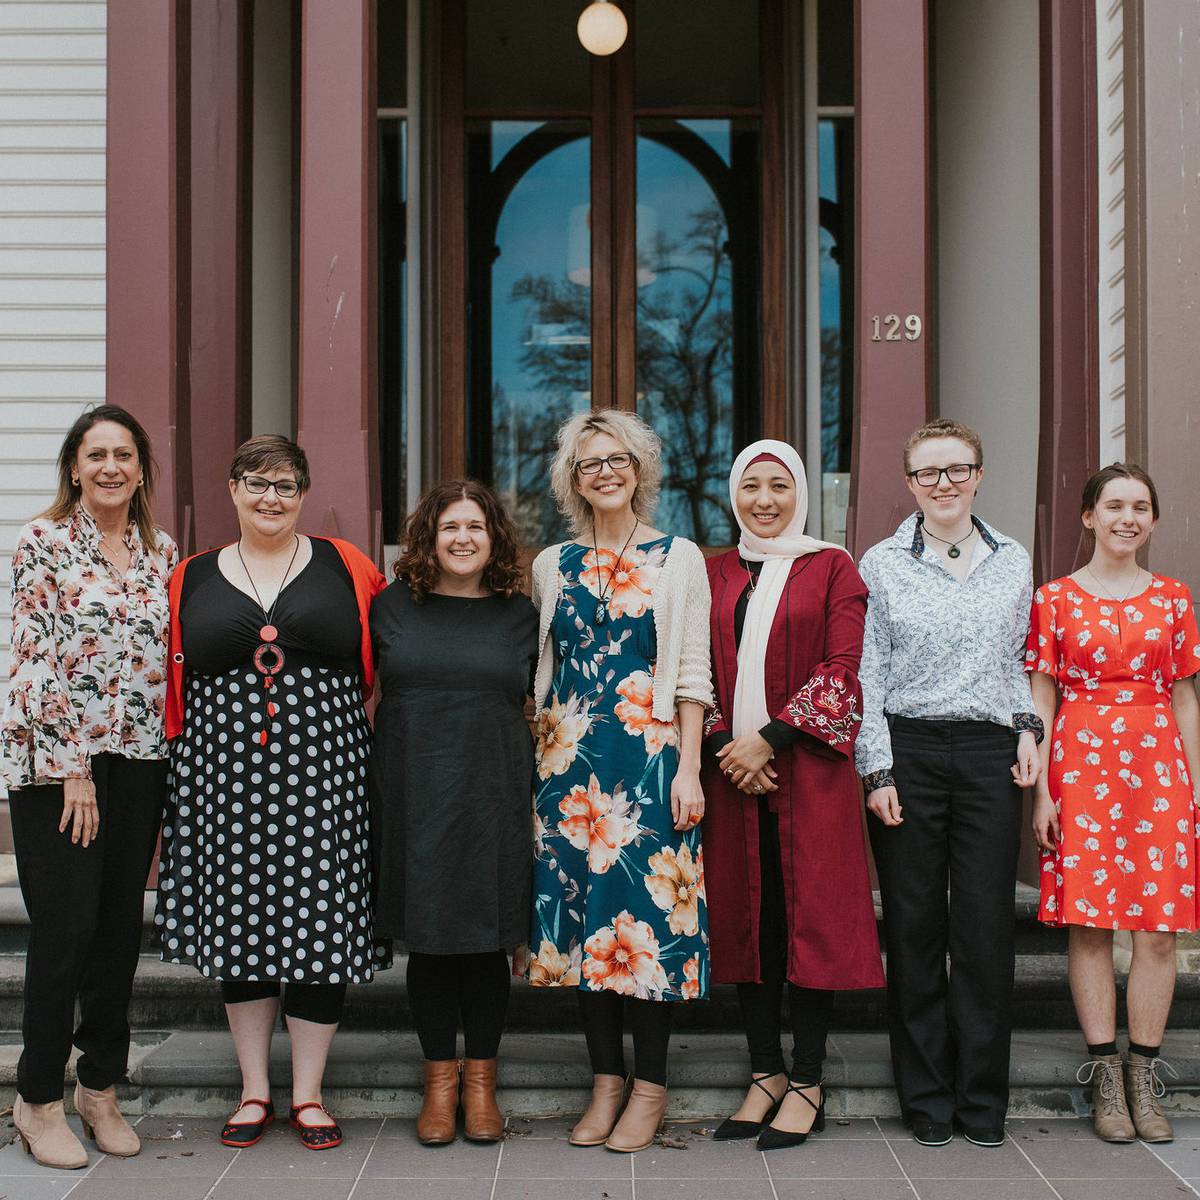 The Kate Sheppard Women’s Fund